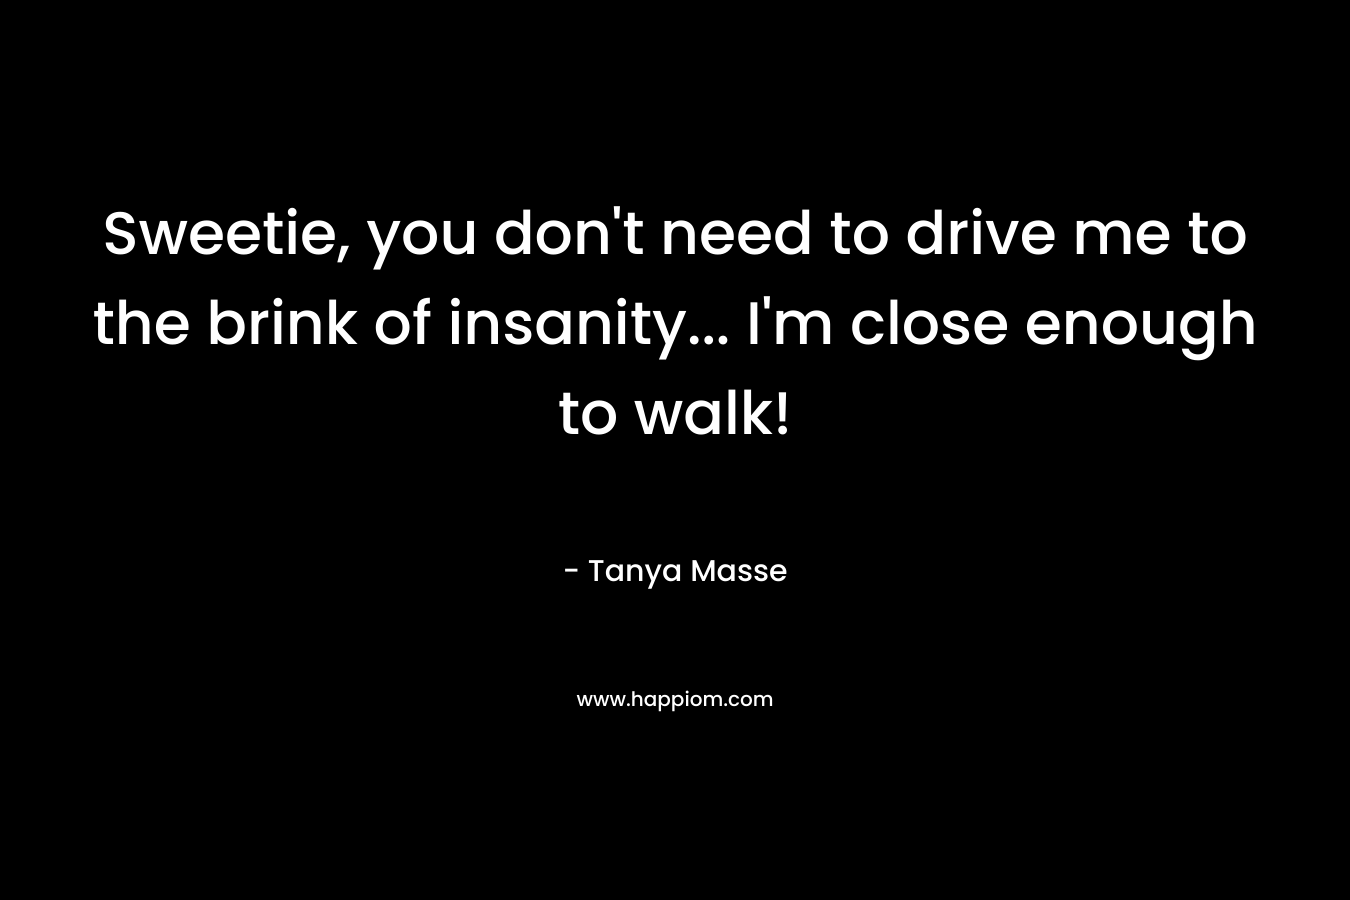 Sweetie, you don't need to drive me to the brink of insanity... I'm close enough to walk!